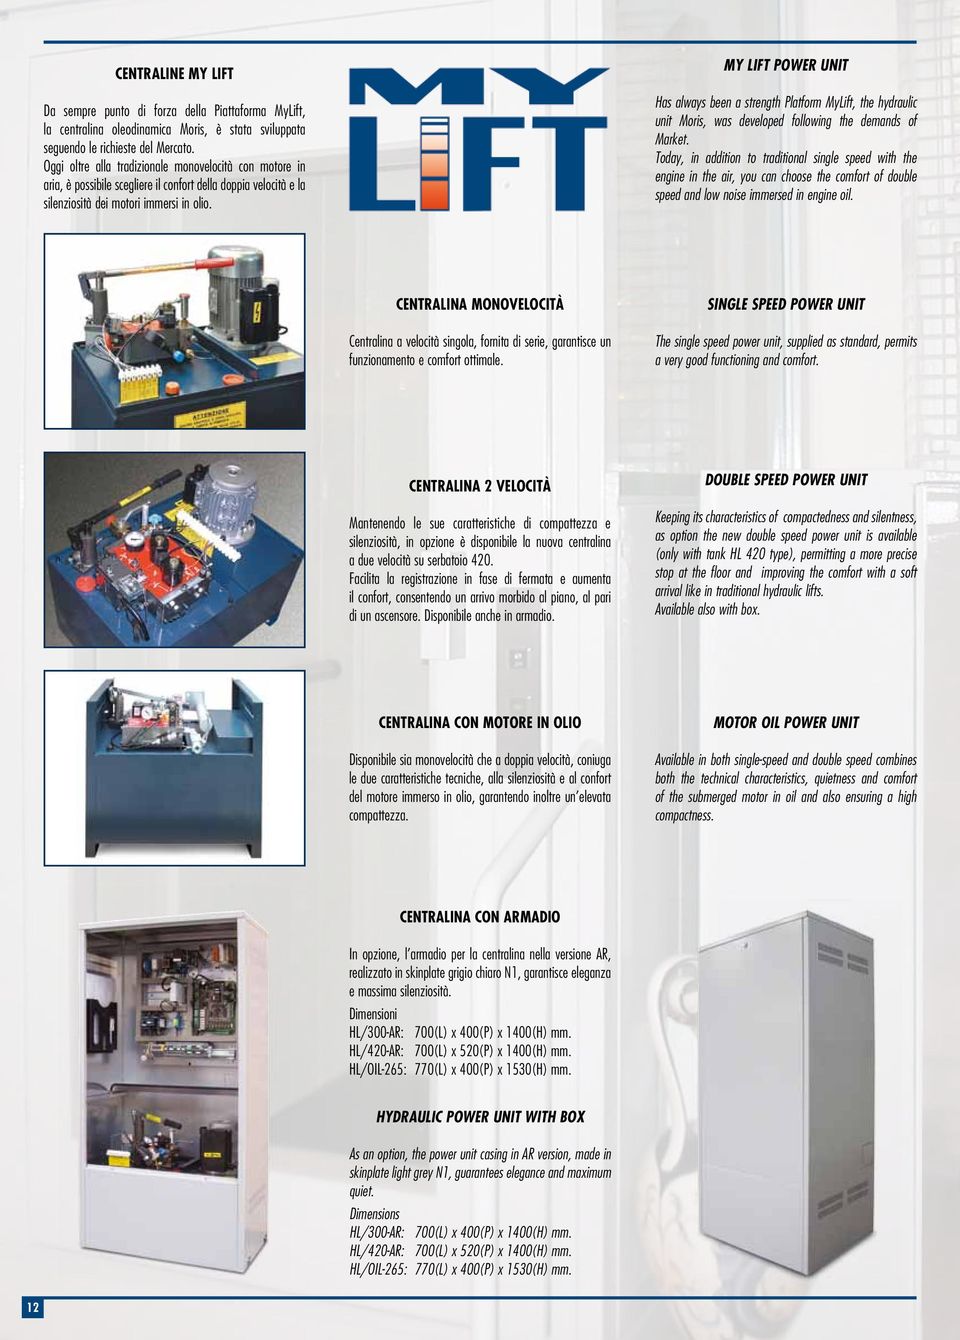 my lift power unit Has always been a strength Platform MyLift, the hydraulic unit Moris, was developed following the demands of Market.